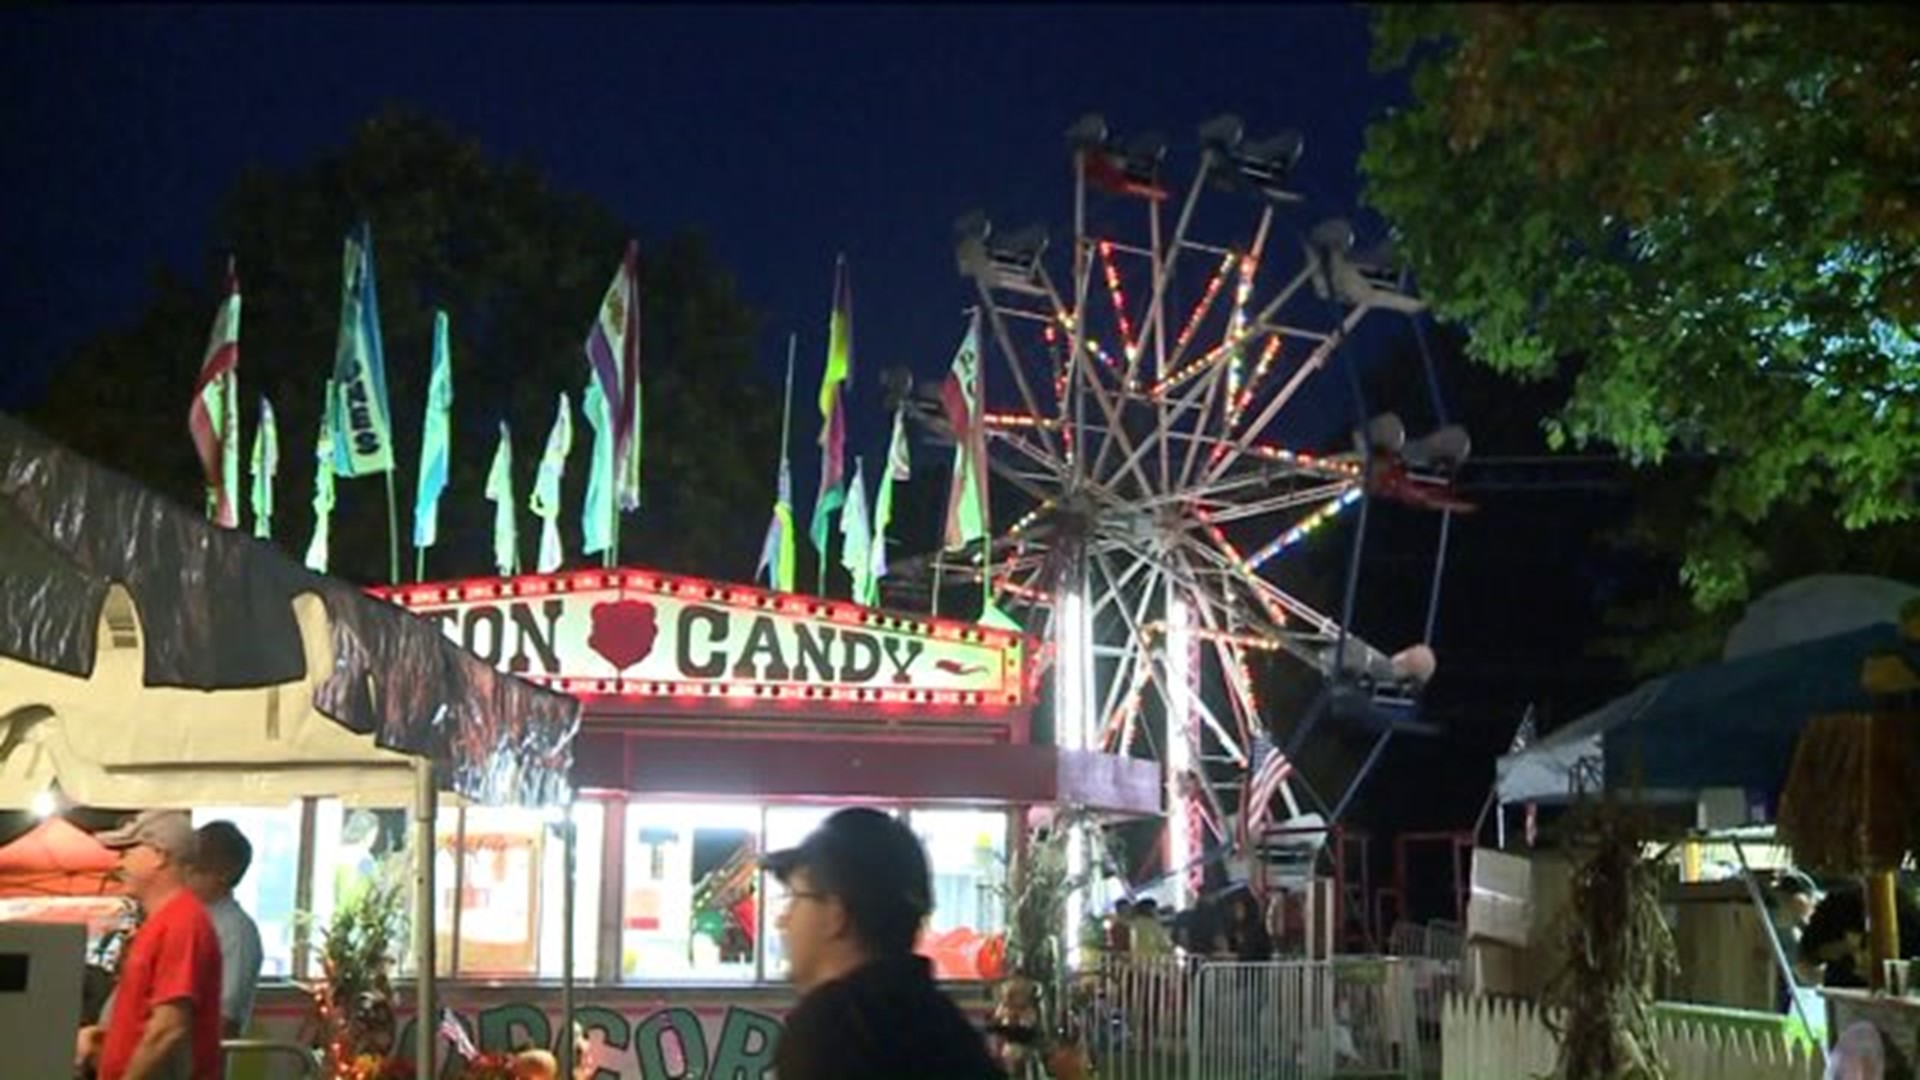 State`s biggest fair has fried food, rides and great music to enjoy